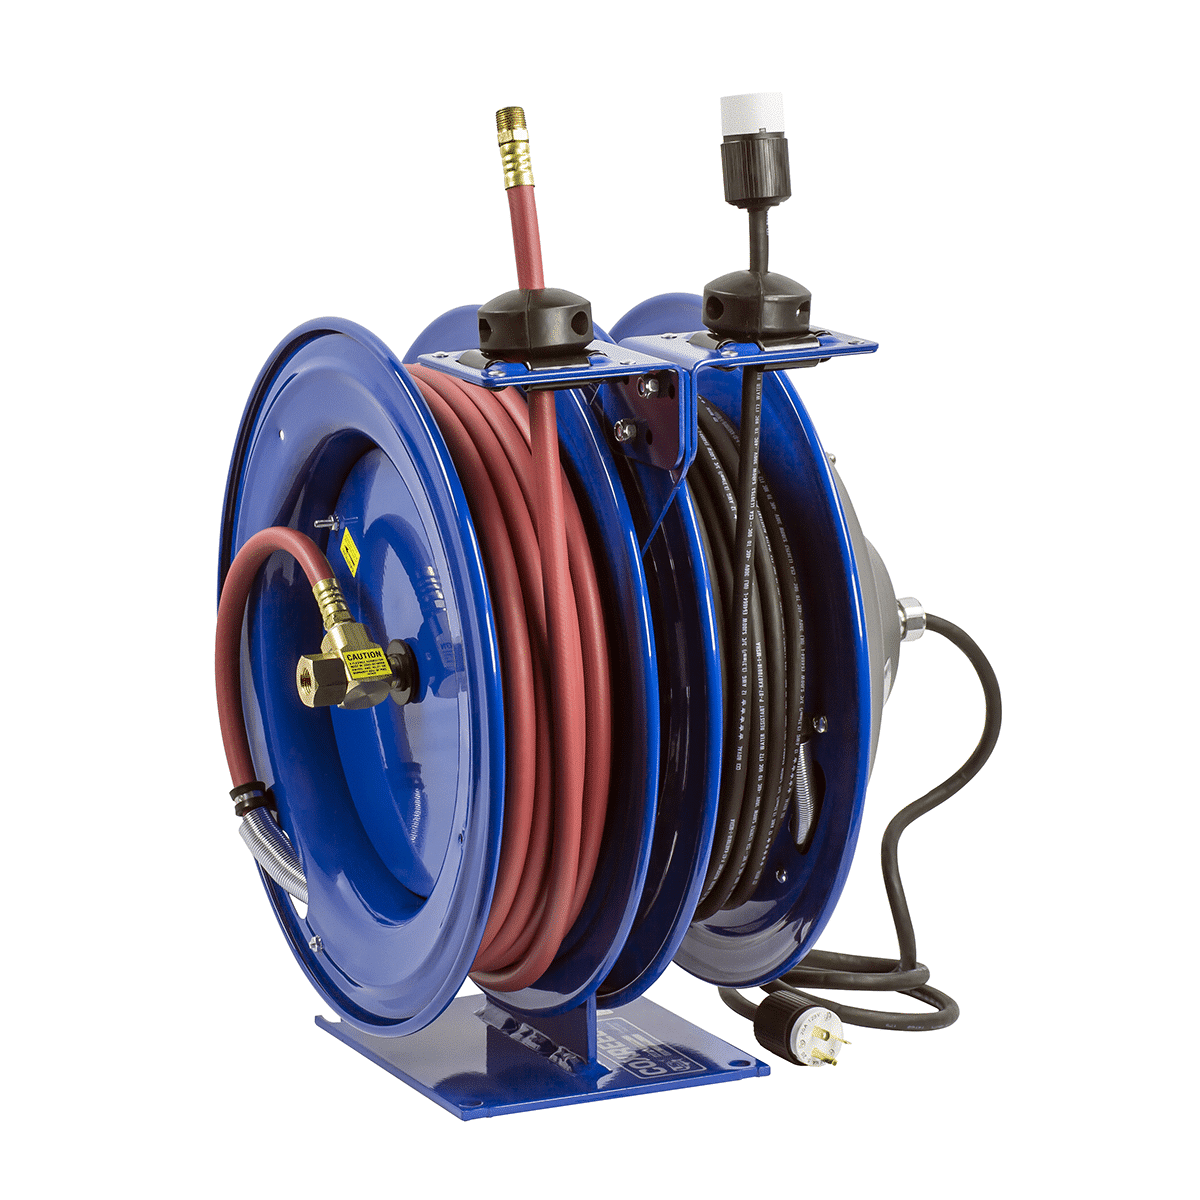 Electric, Air & Water Hose Reels. Commercial & Industrial USA Made Sales